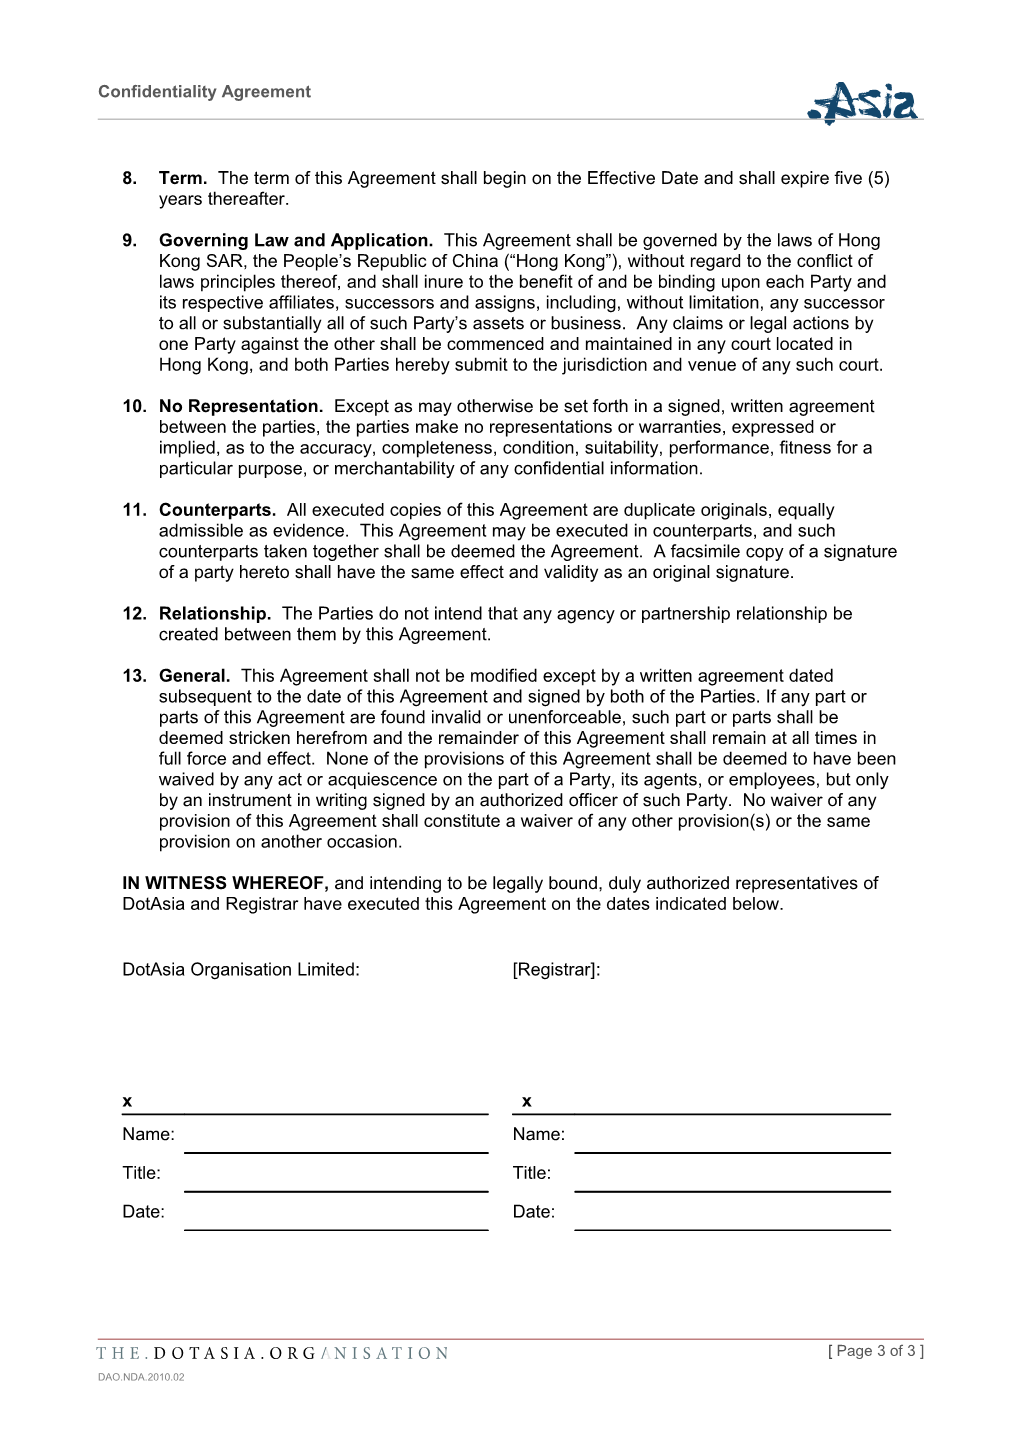 Confidentiality Agreement s12